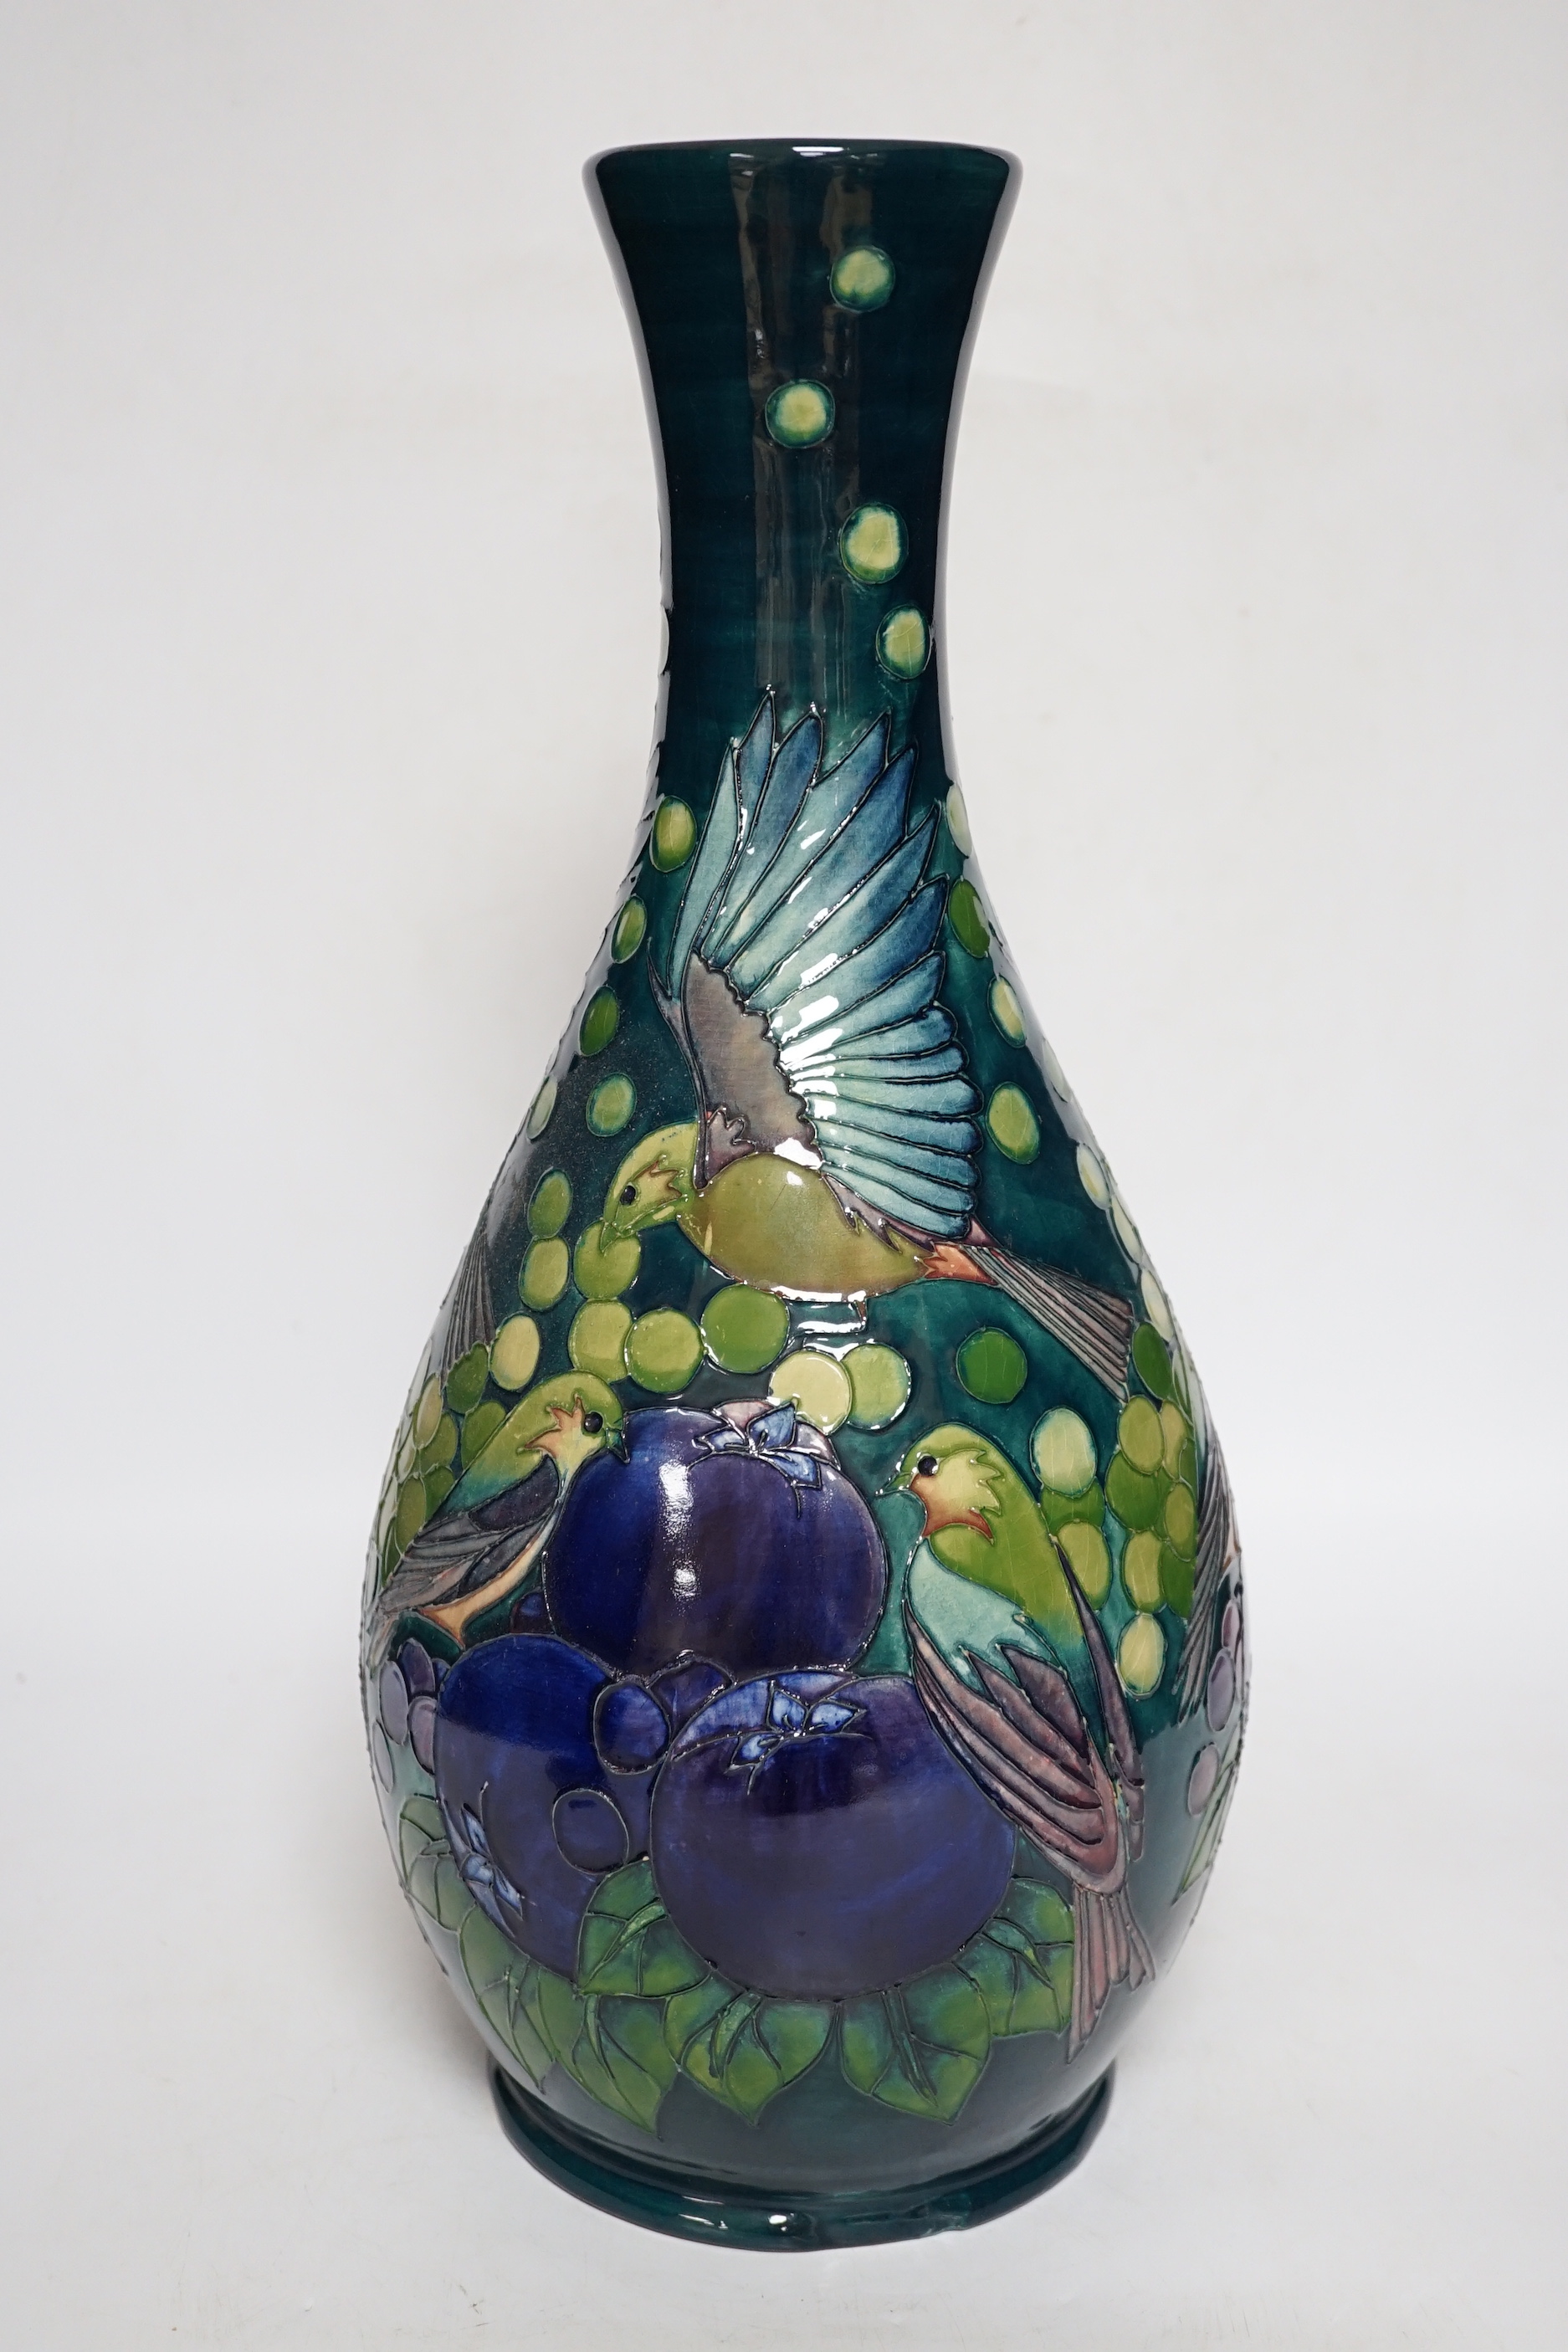 A large boxed Moorcroft vase, ‘Finches pattern’, on a dark blue-green ground, bell date mark to base, signed LS and dated 27.8.92, 42cm high